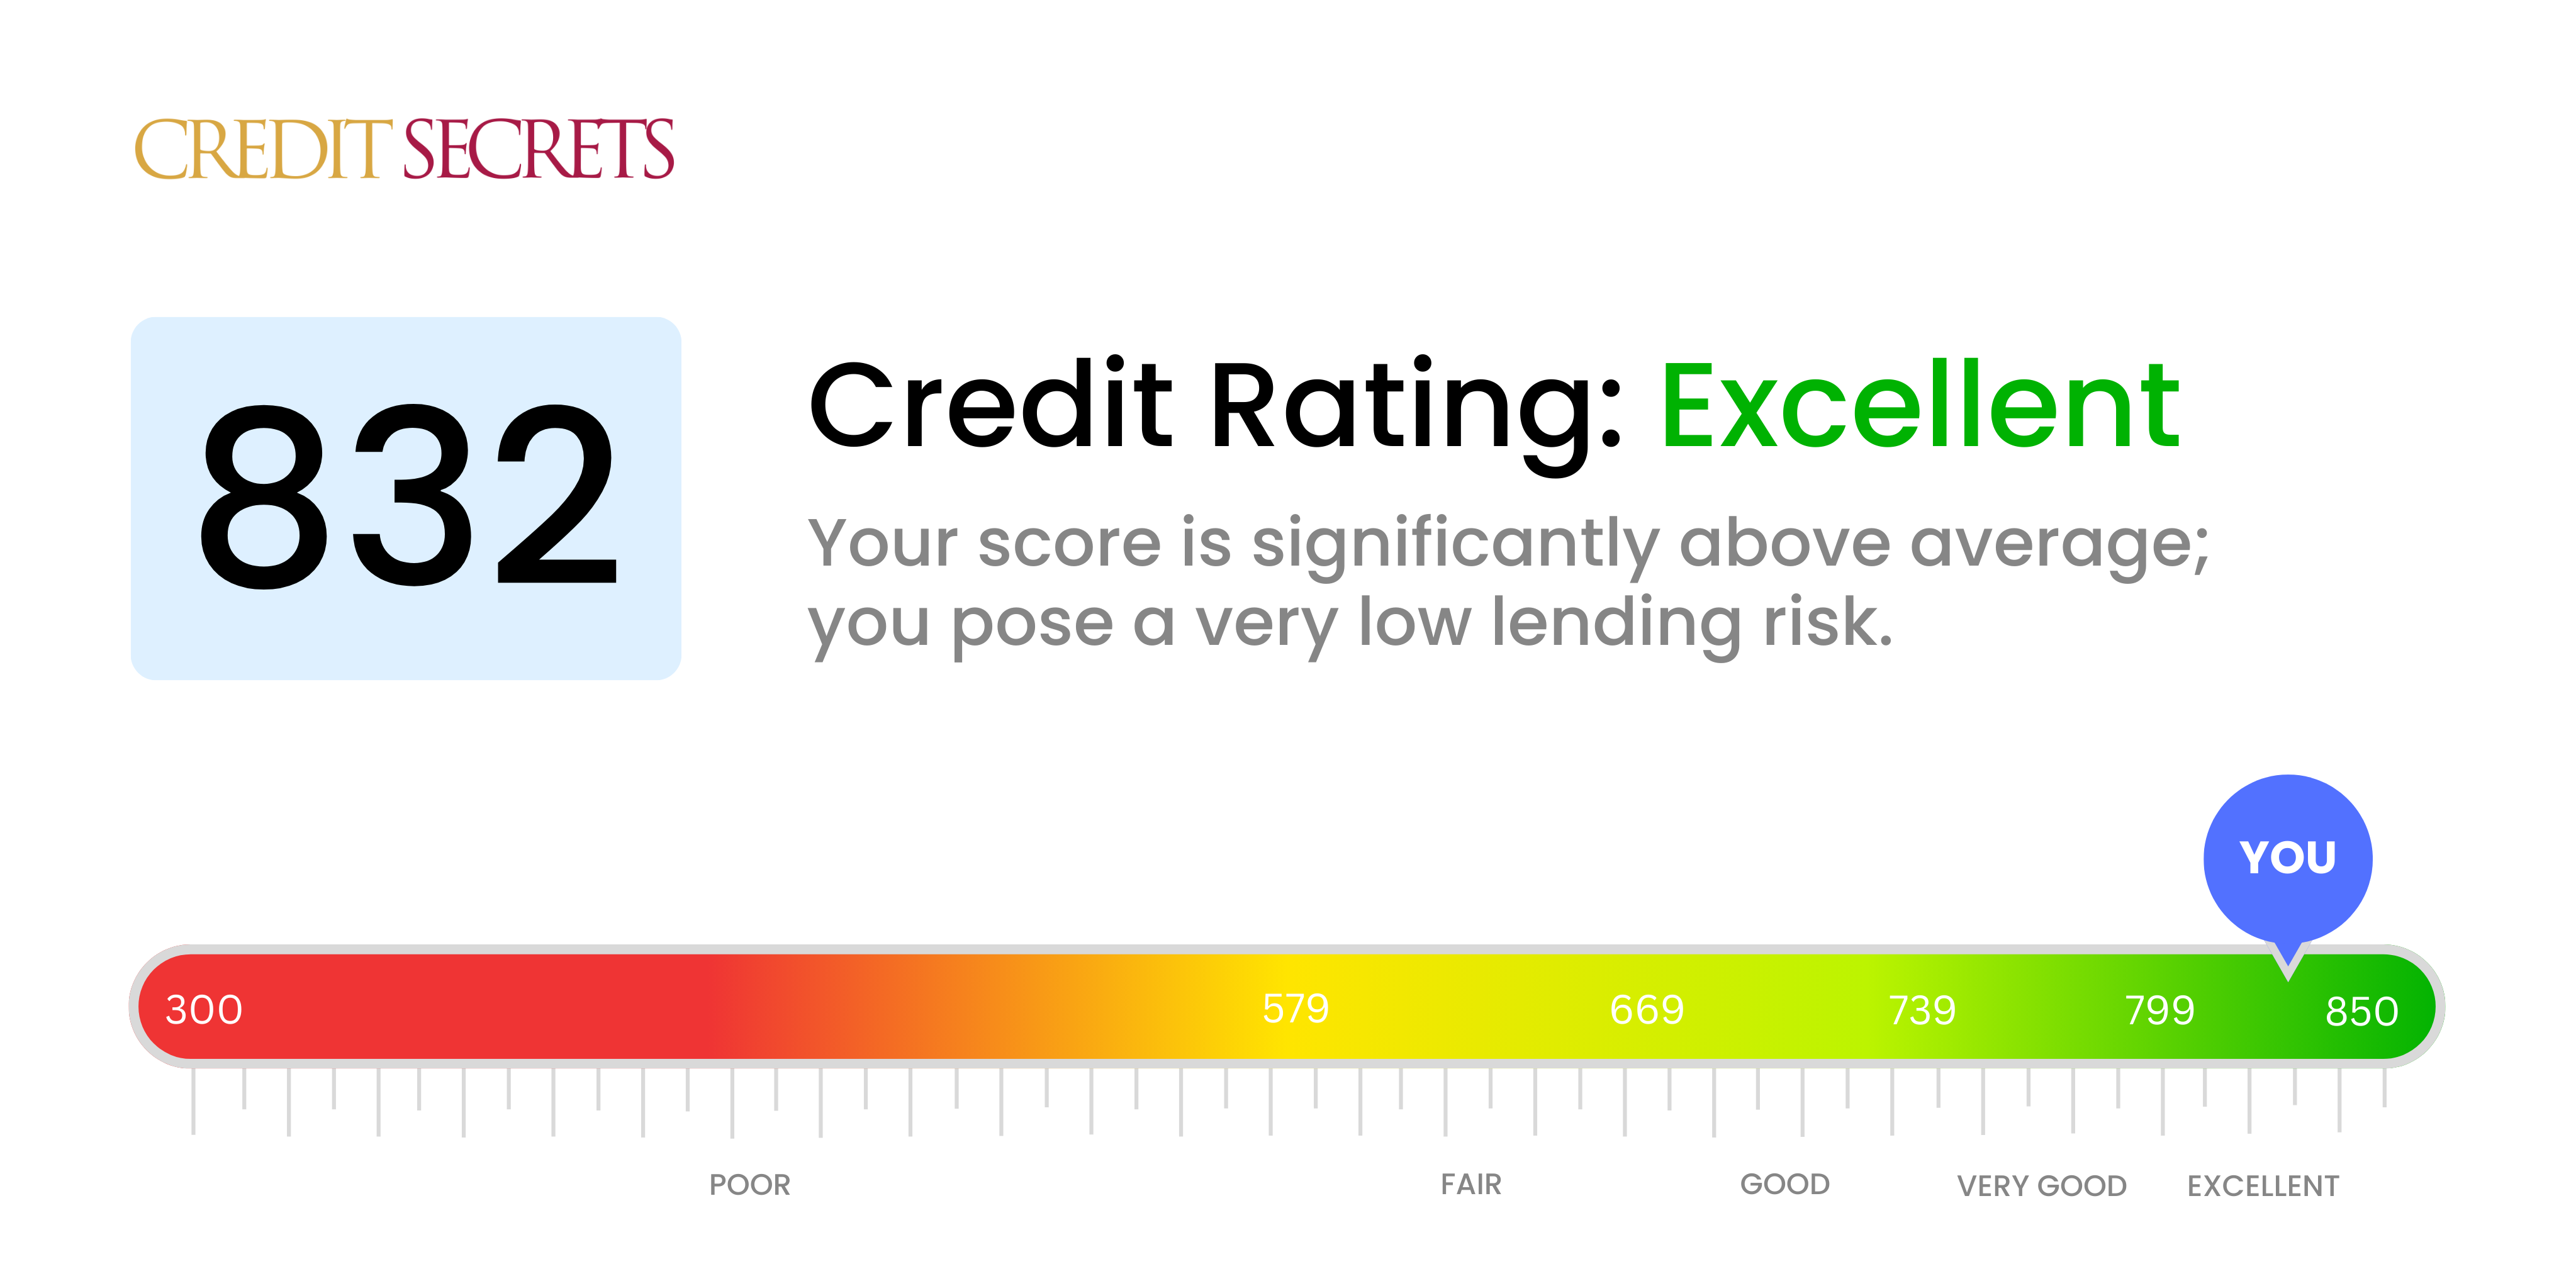 Is 832 a good credit score?